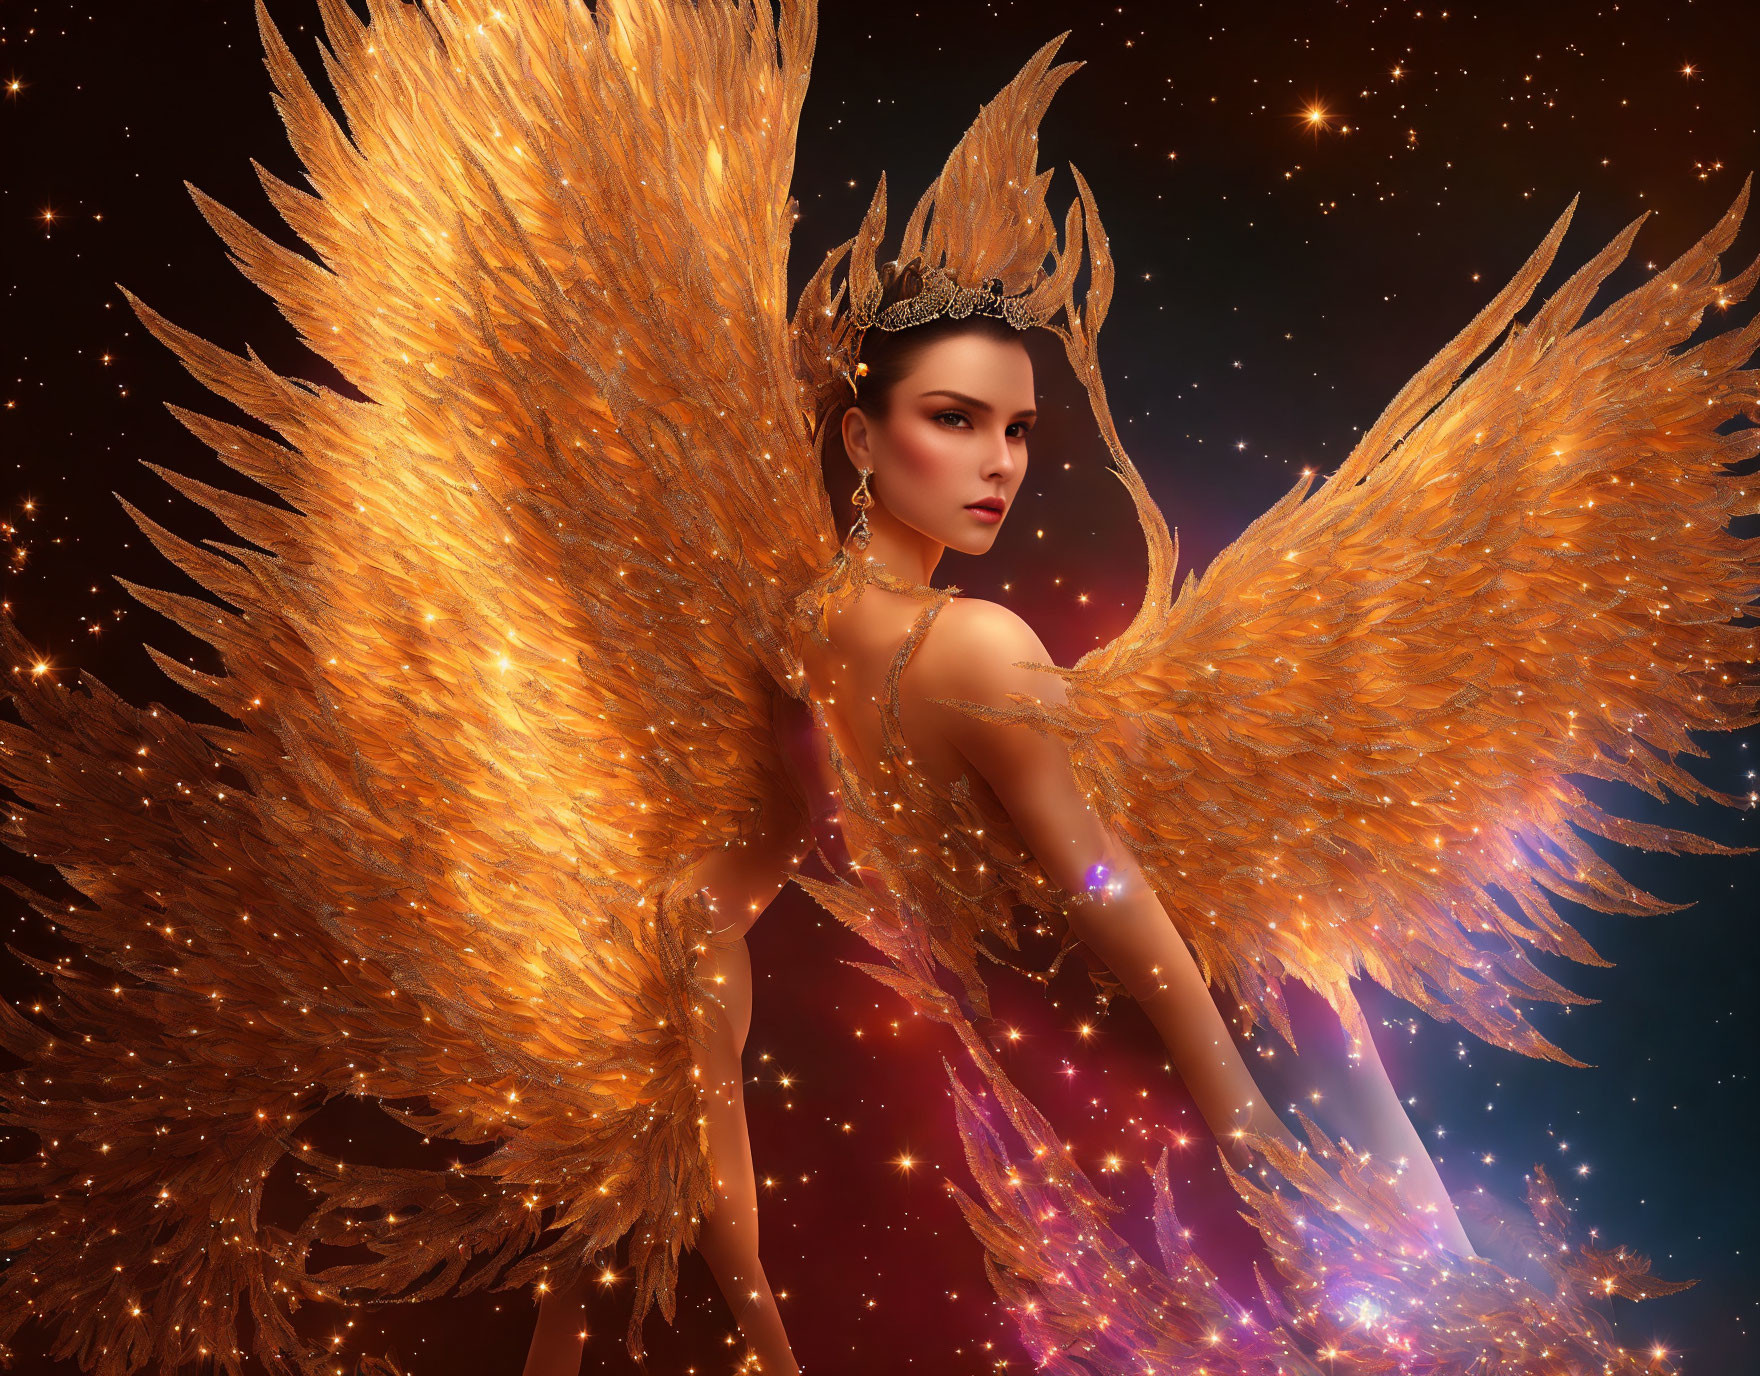 Golden-winged figure with crown and jewels against starry backdrop